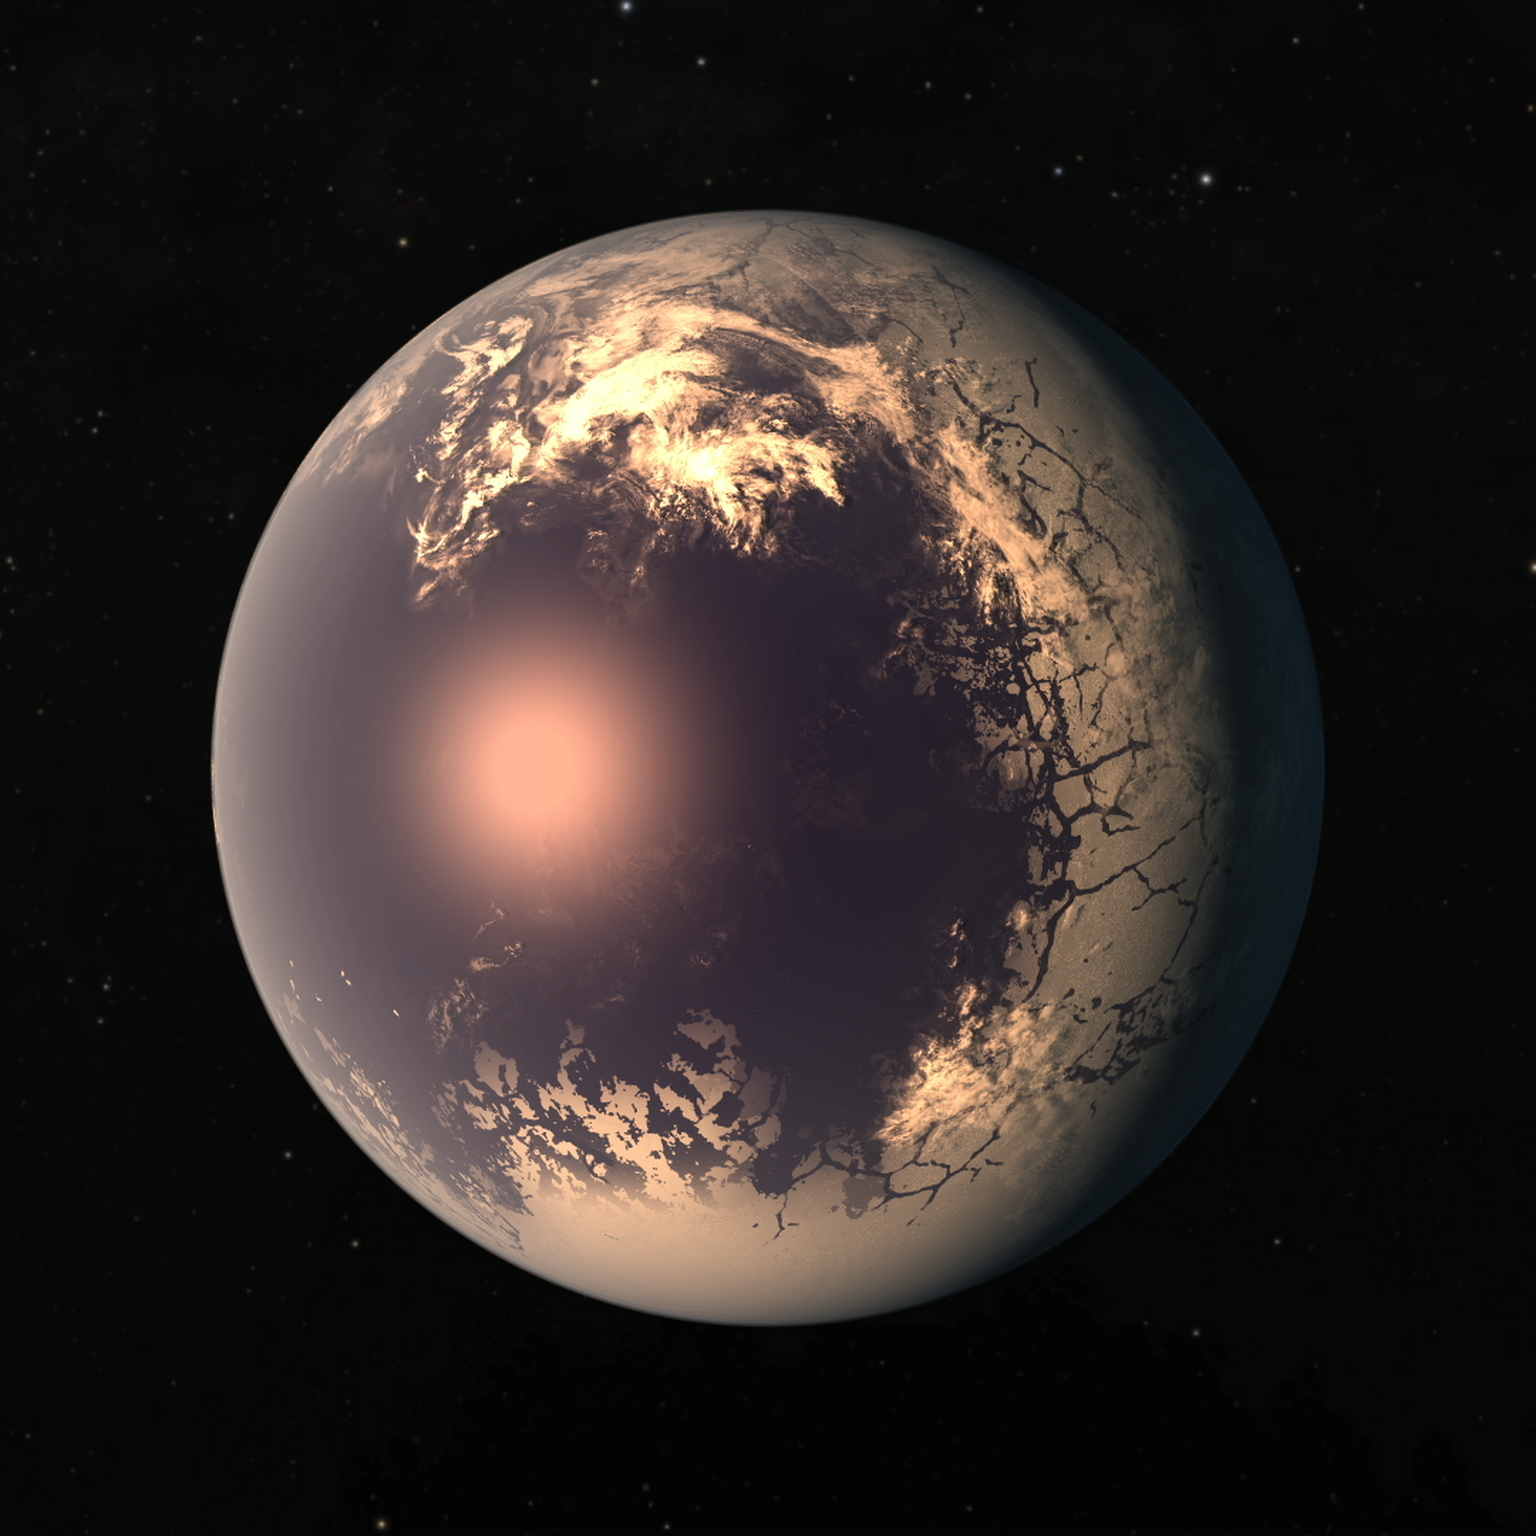 Exoplanet Trappist-1 f